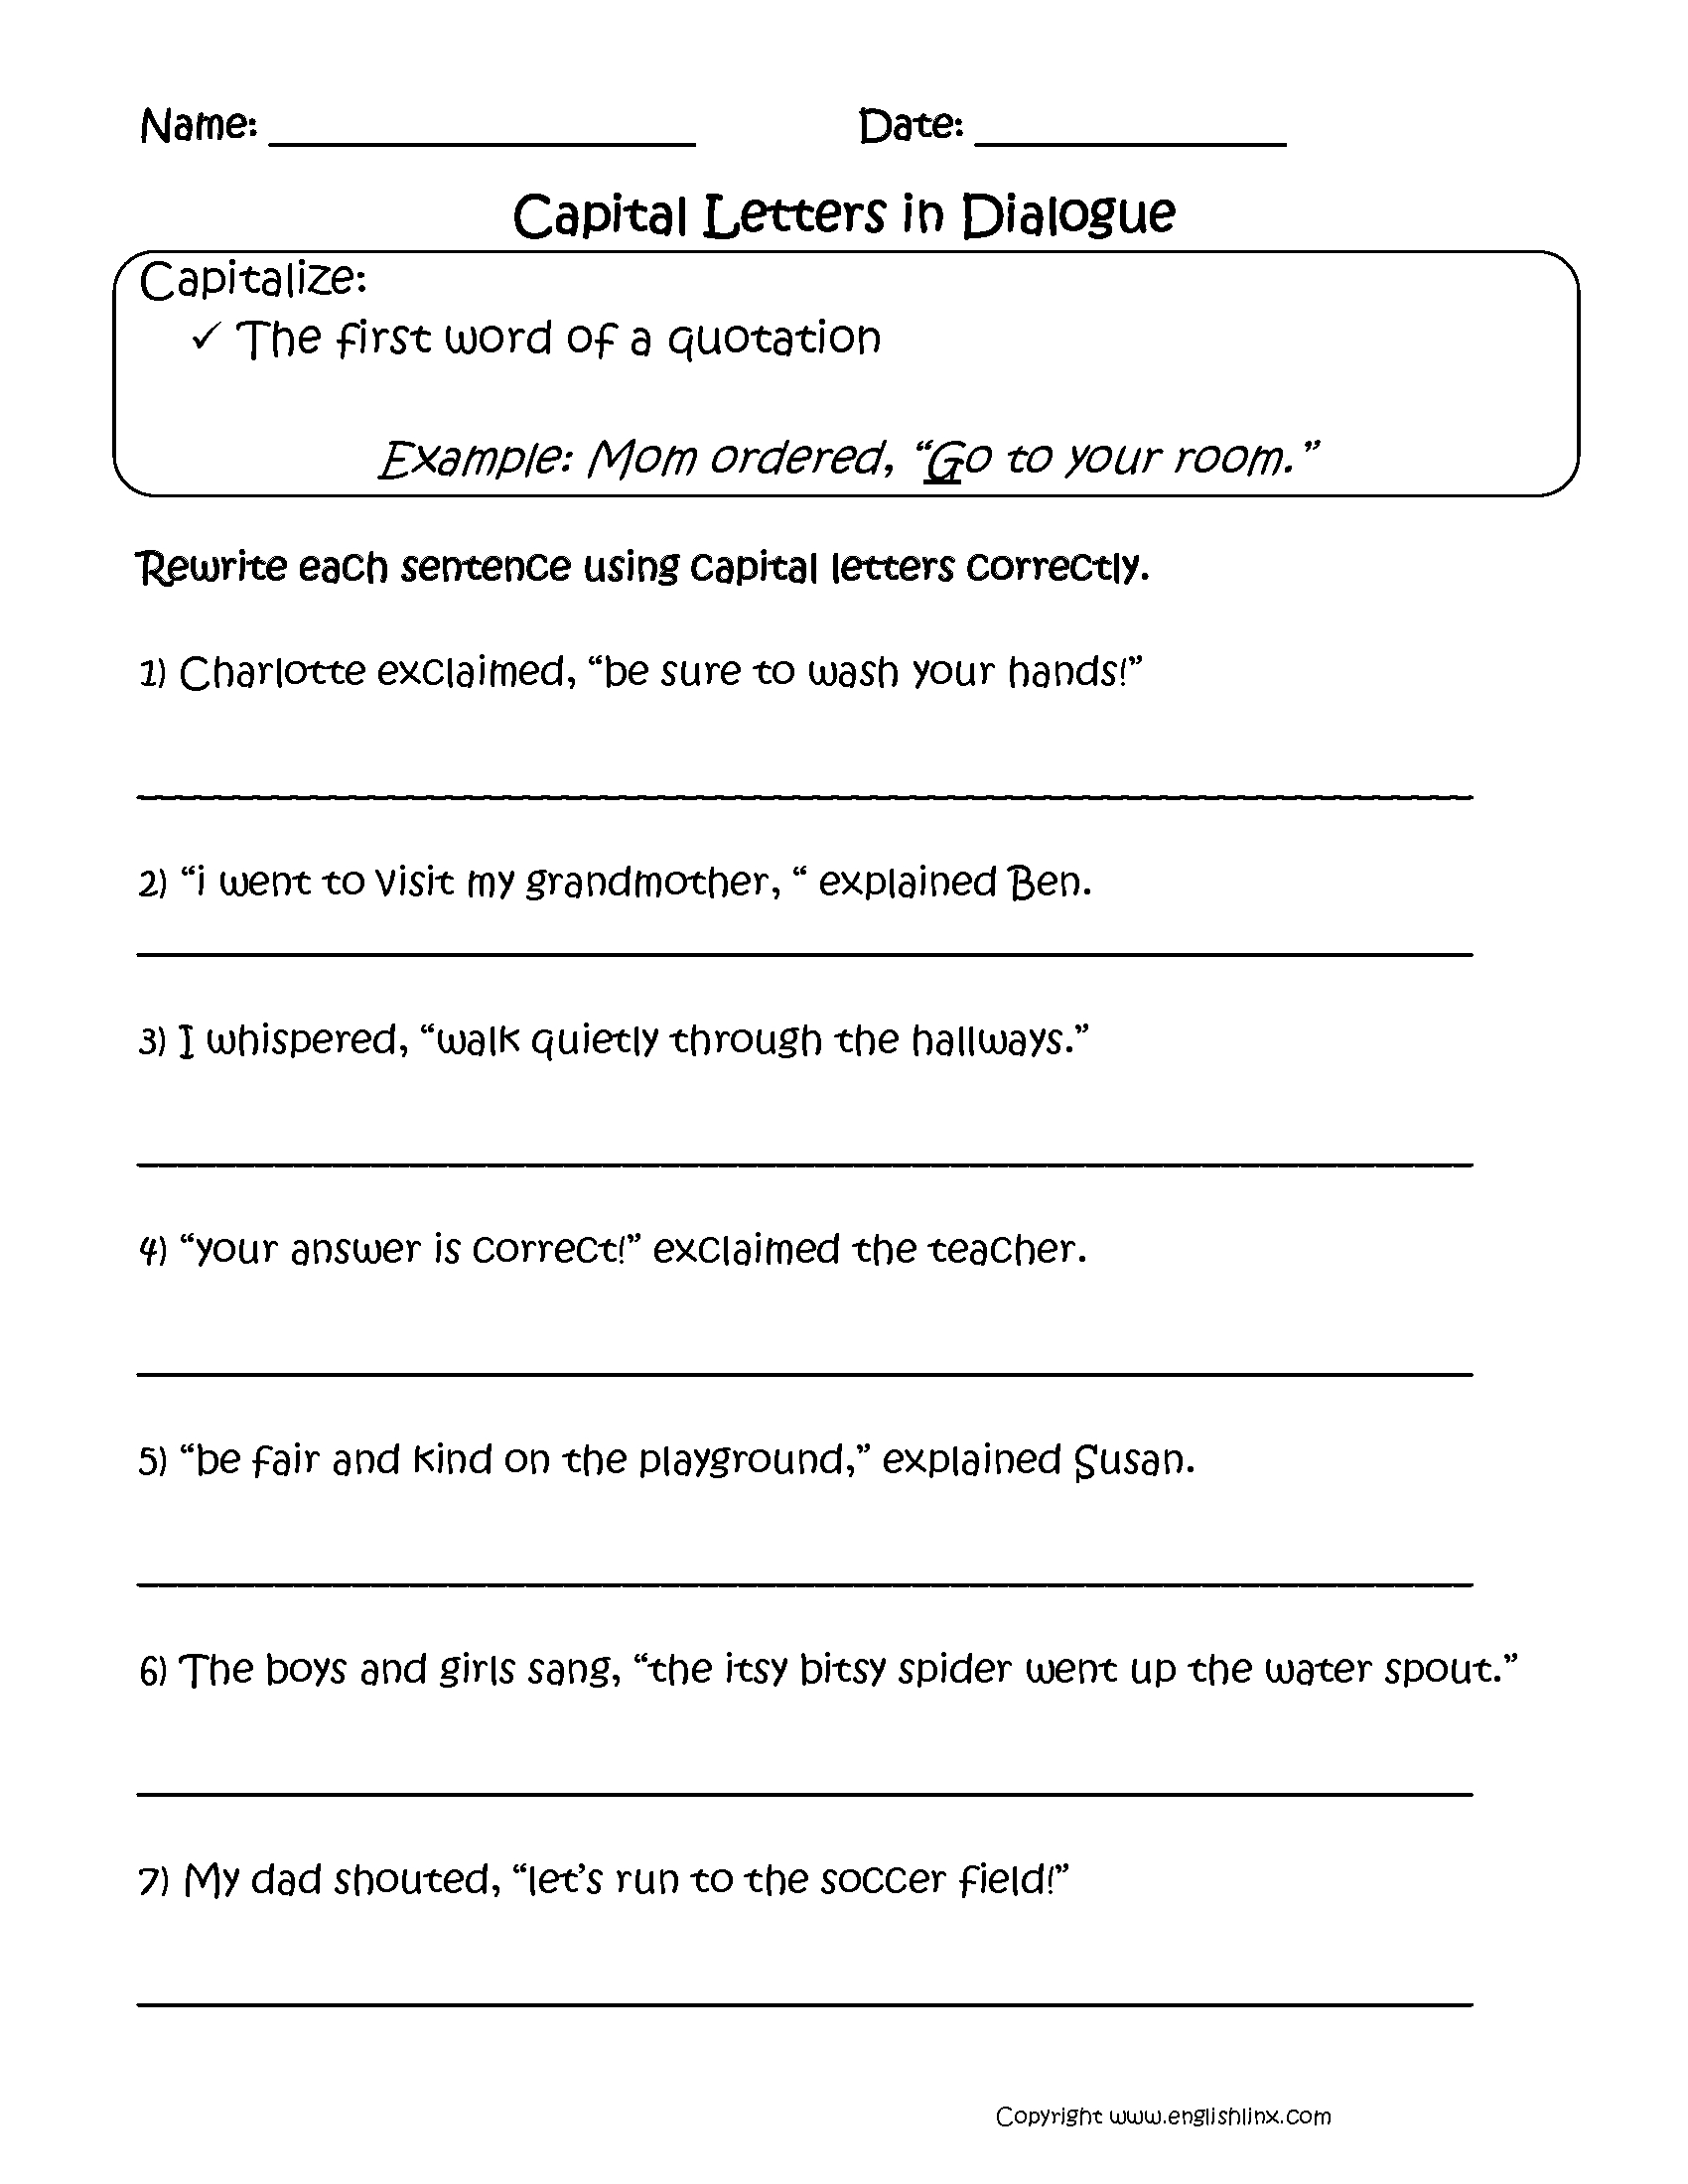 printable-capitalization-worksheets-4th-grade-lexia-s-blog